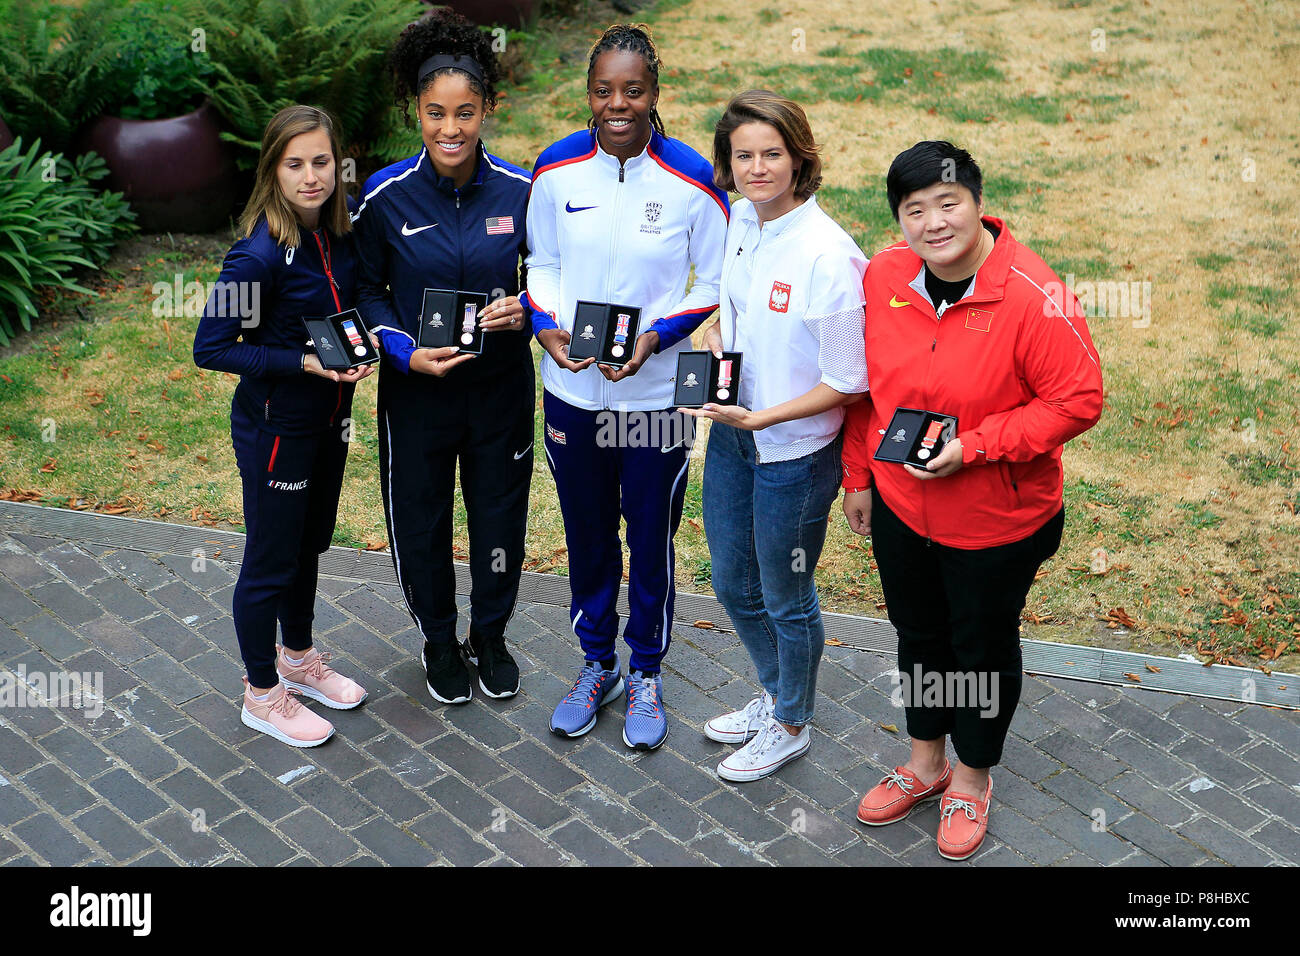 London, UK. 11th July, 2018. Lorraine Ugen of Great Britain (c), Queen Harrison of the USA (2L), Ninon Guillon-Romarin of France (1L), Anna Jagaciak-Michalska of Poland (1R) and Gong Lijiao of China (2R) pose with their medals.  all the athletics world cup team captains, all Women, today are presented with unique Platinum captain's medals marking 100 years since first British women secured the right to vote. Athletics World Cup media day at the Terrace Gallery, Museum of London in London on Thursday 12th July 2018. Credit: Andrew Orchard sports photography/Alamy Live News Stock Photo